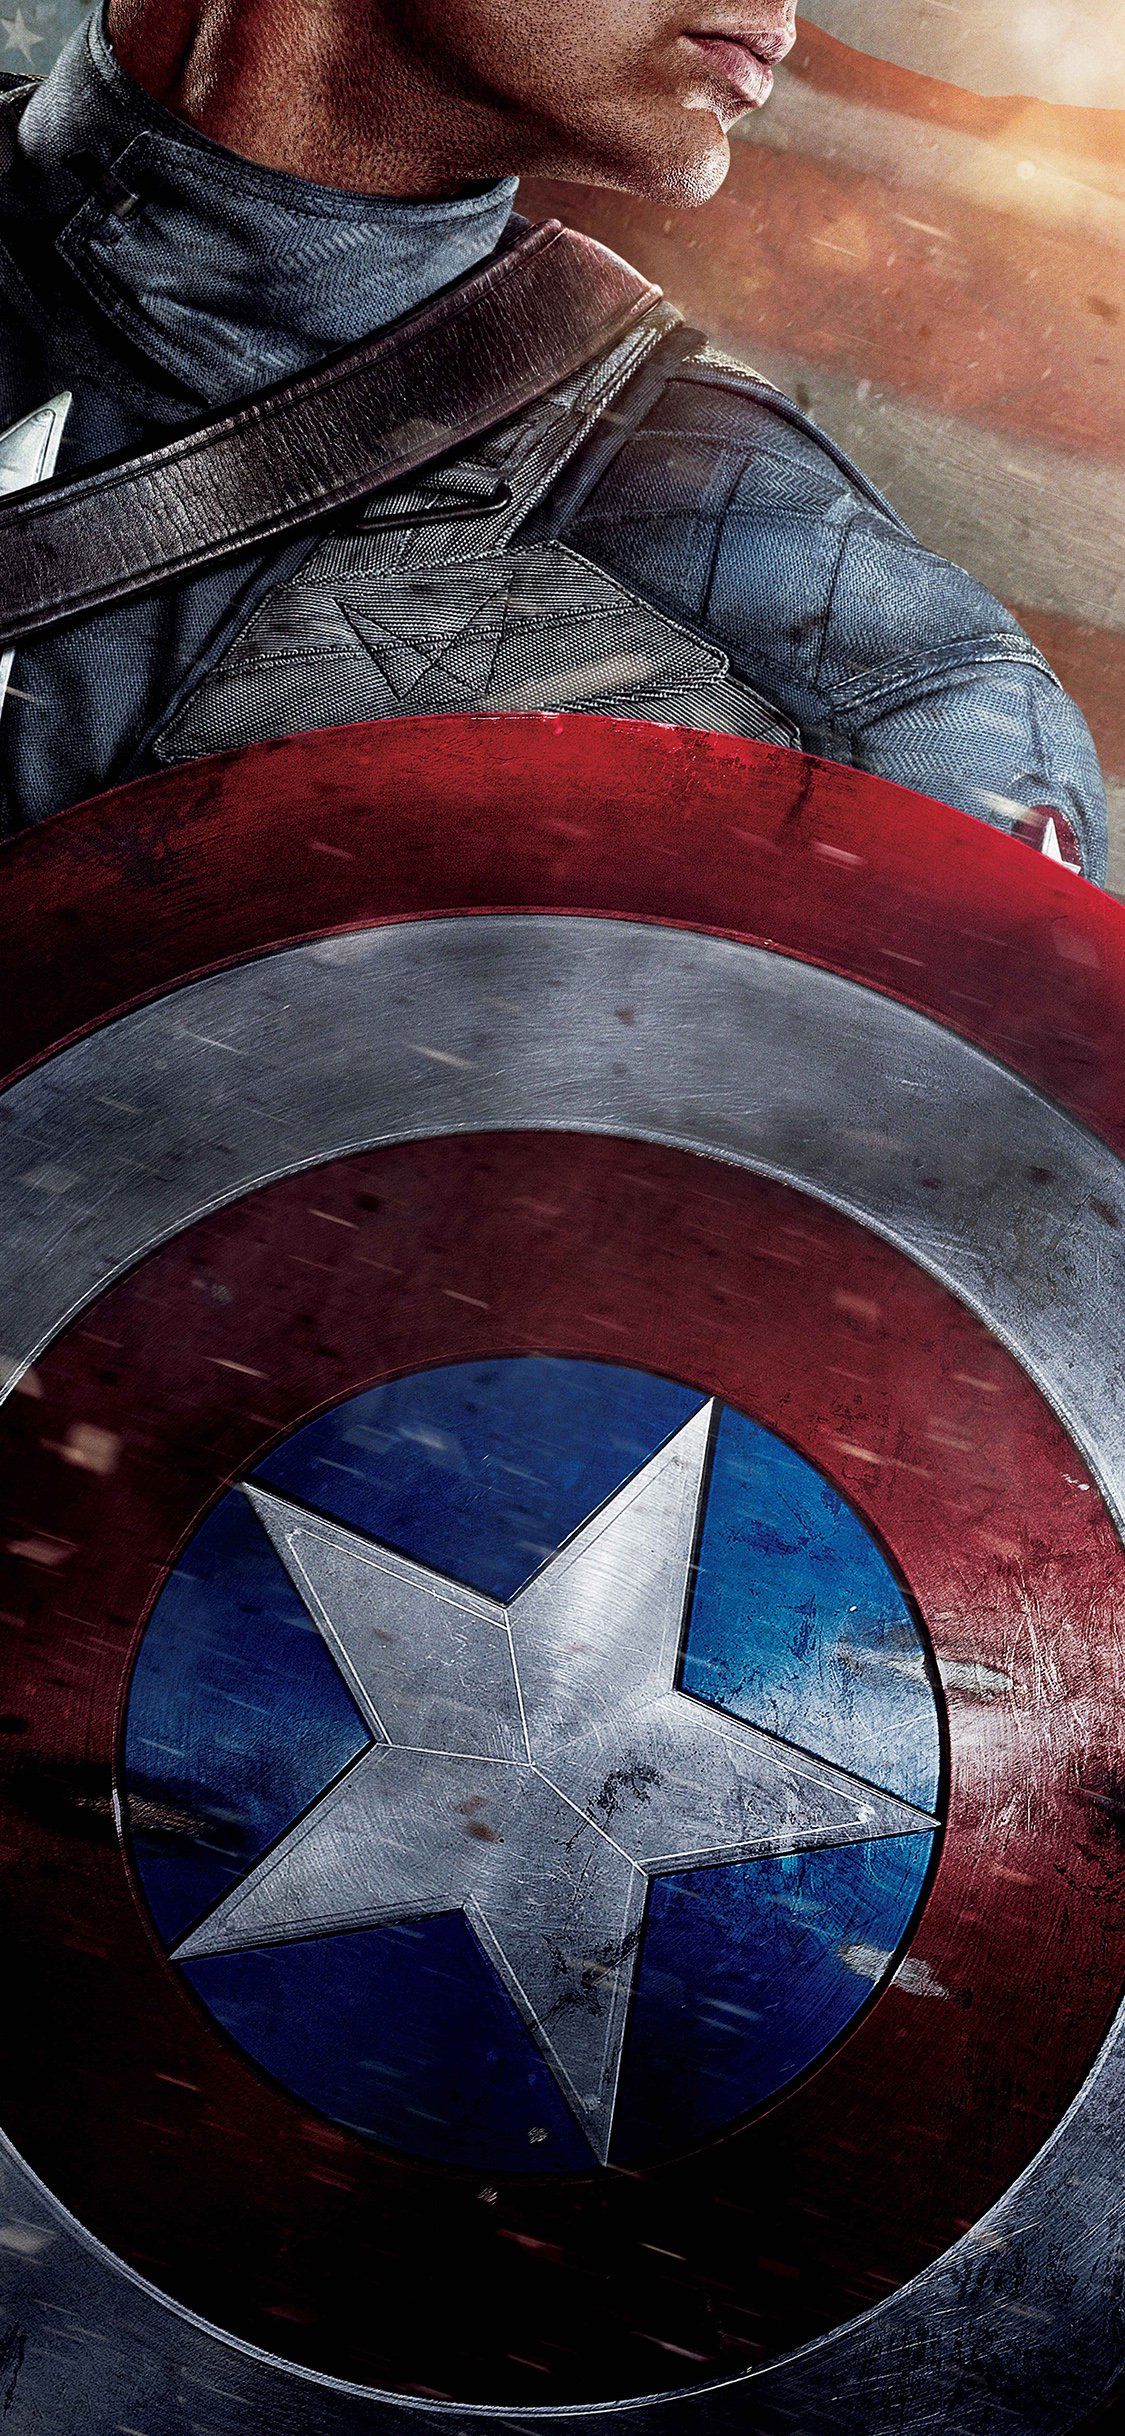 Captain America Shield 4K Iphone Wallpapers